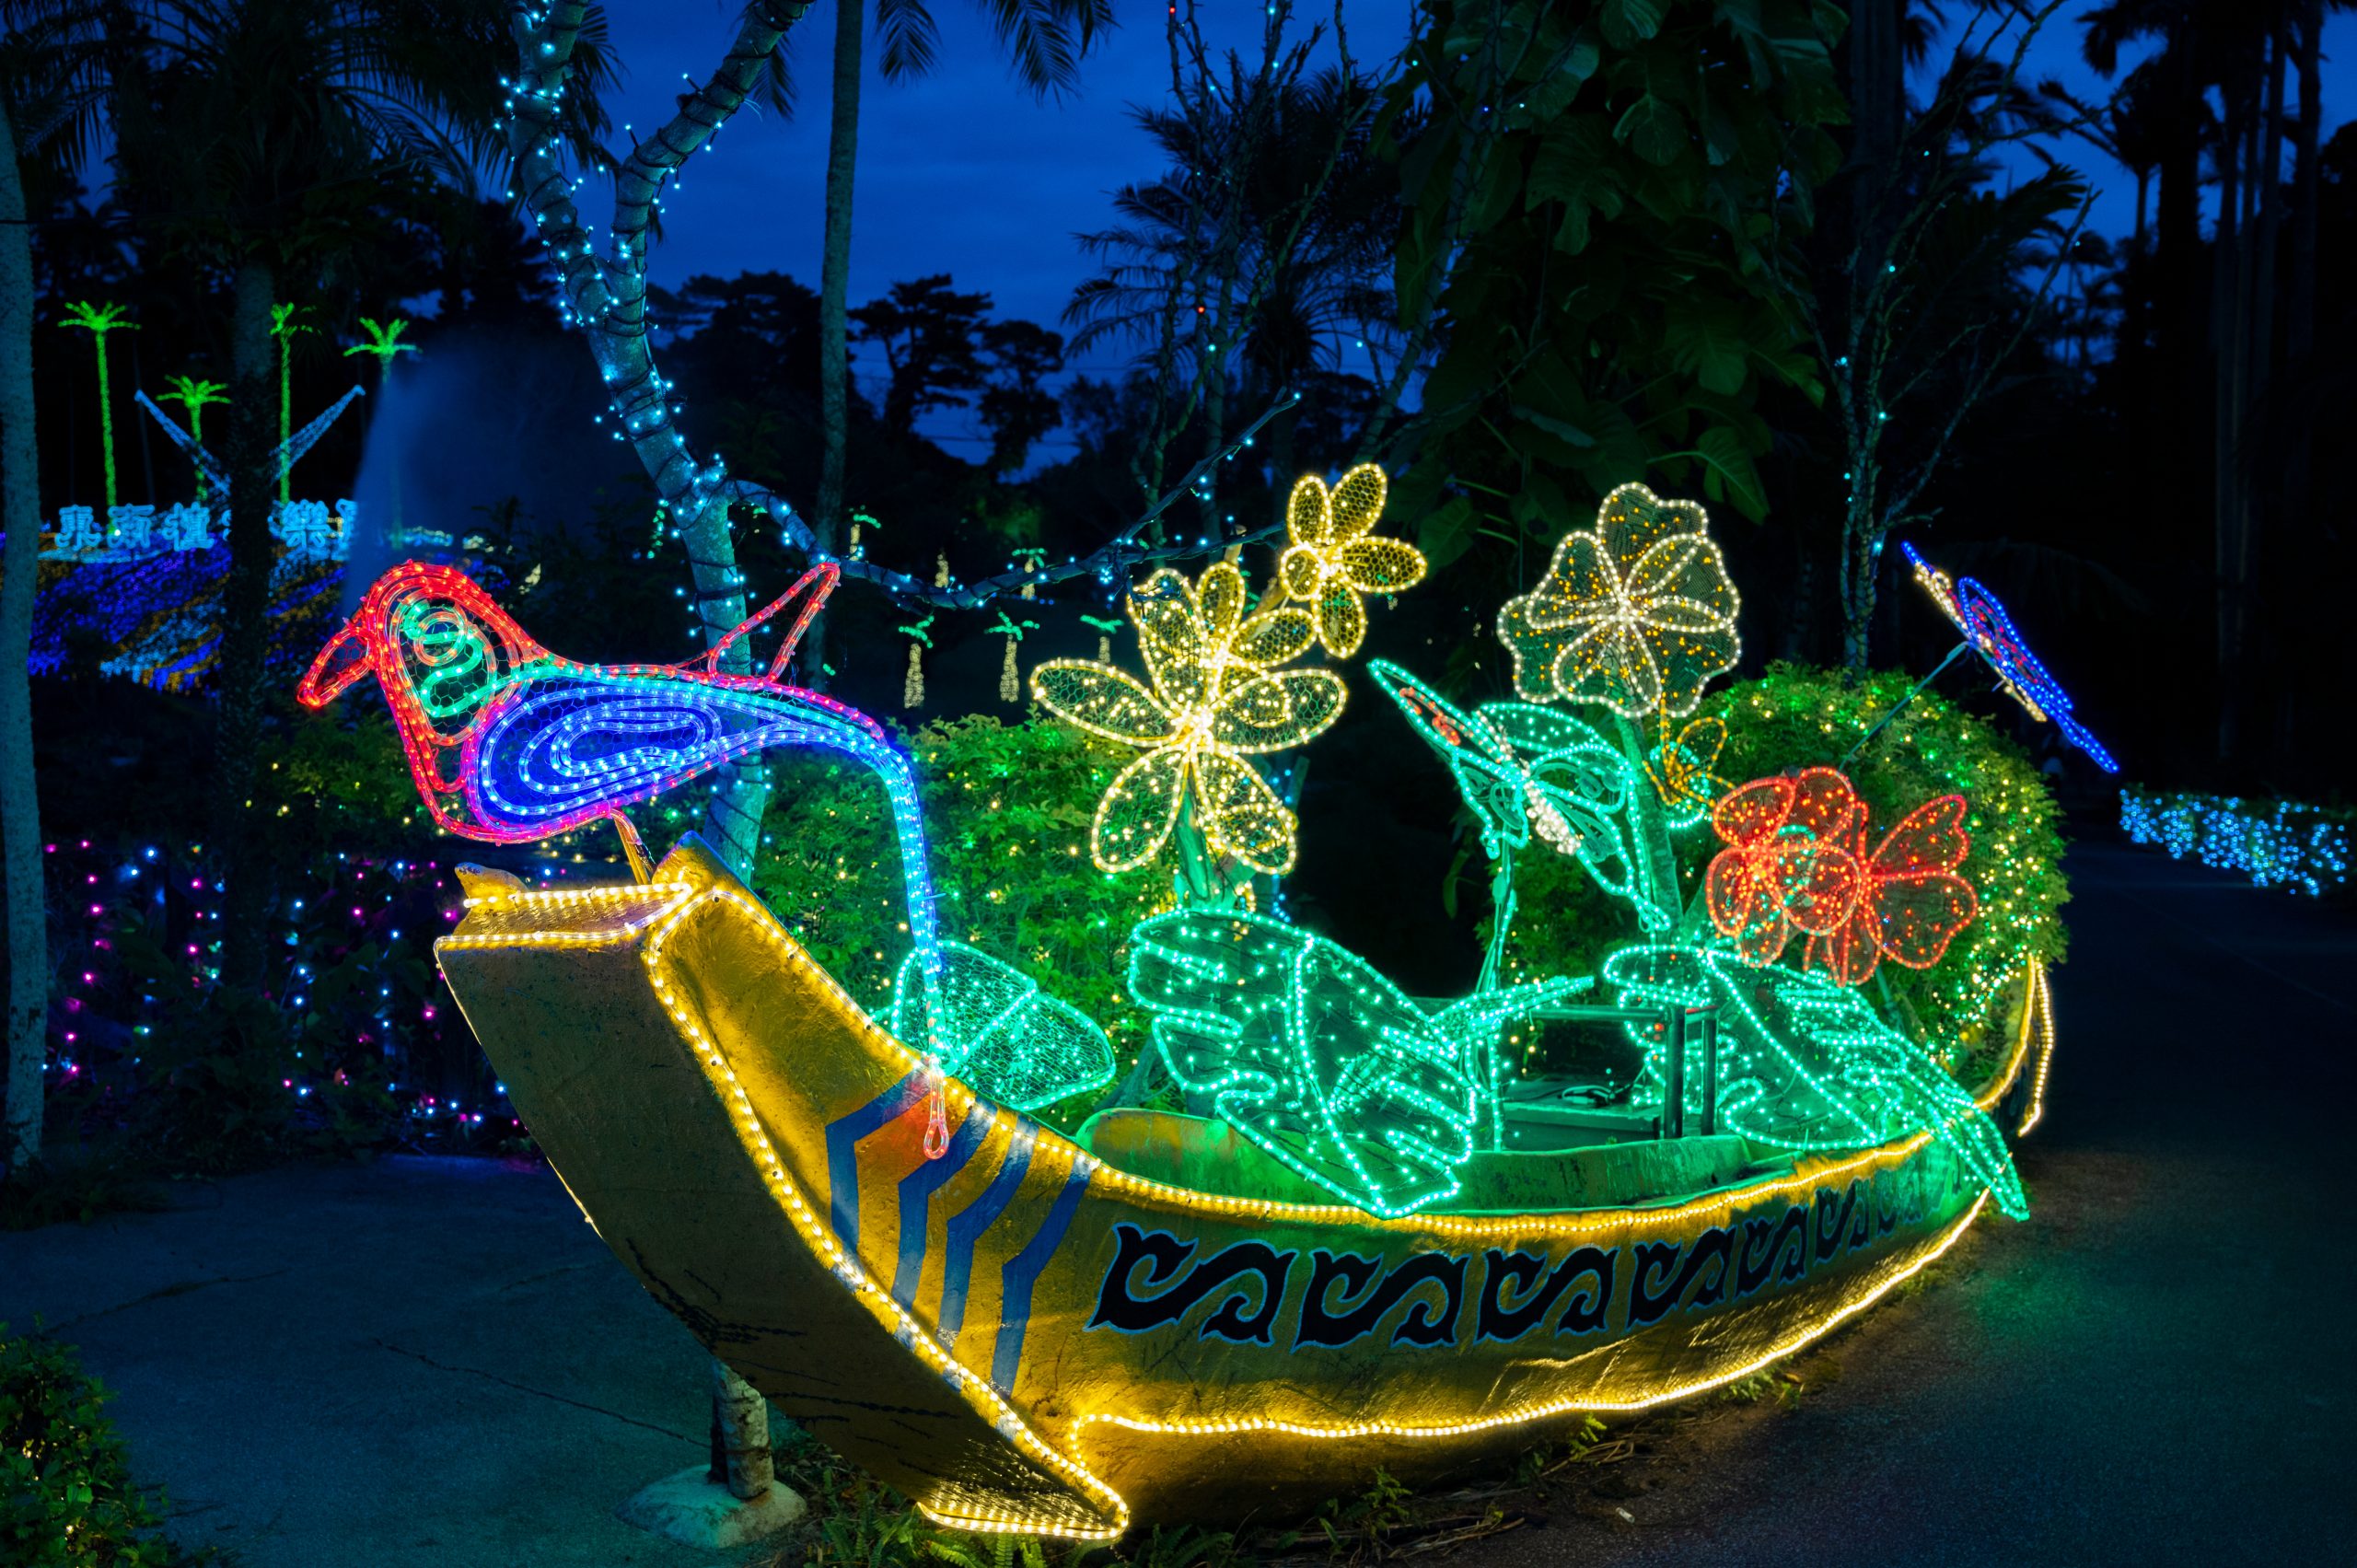 The illuminations at the Southeast Botanical Gardens in Okinawa